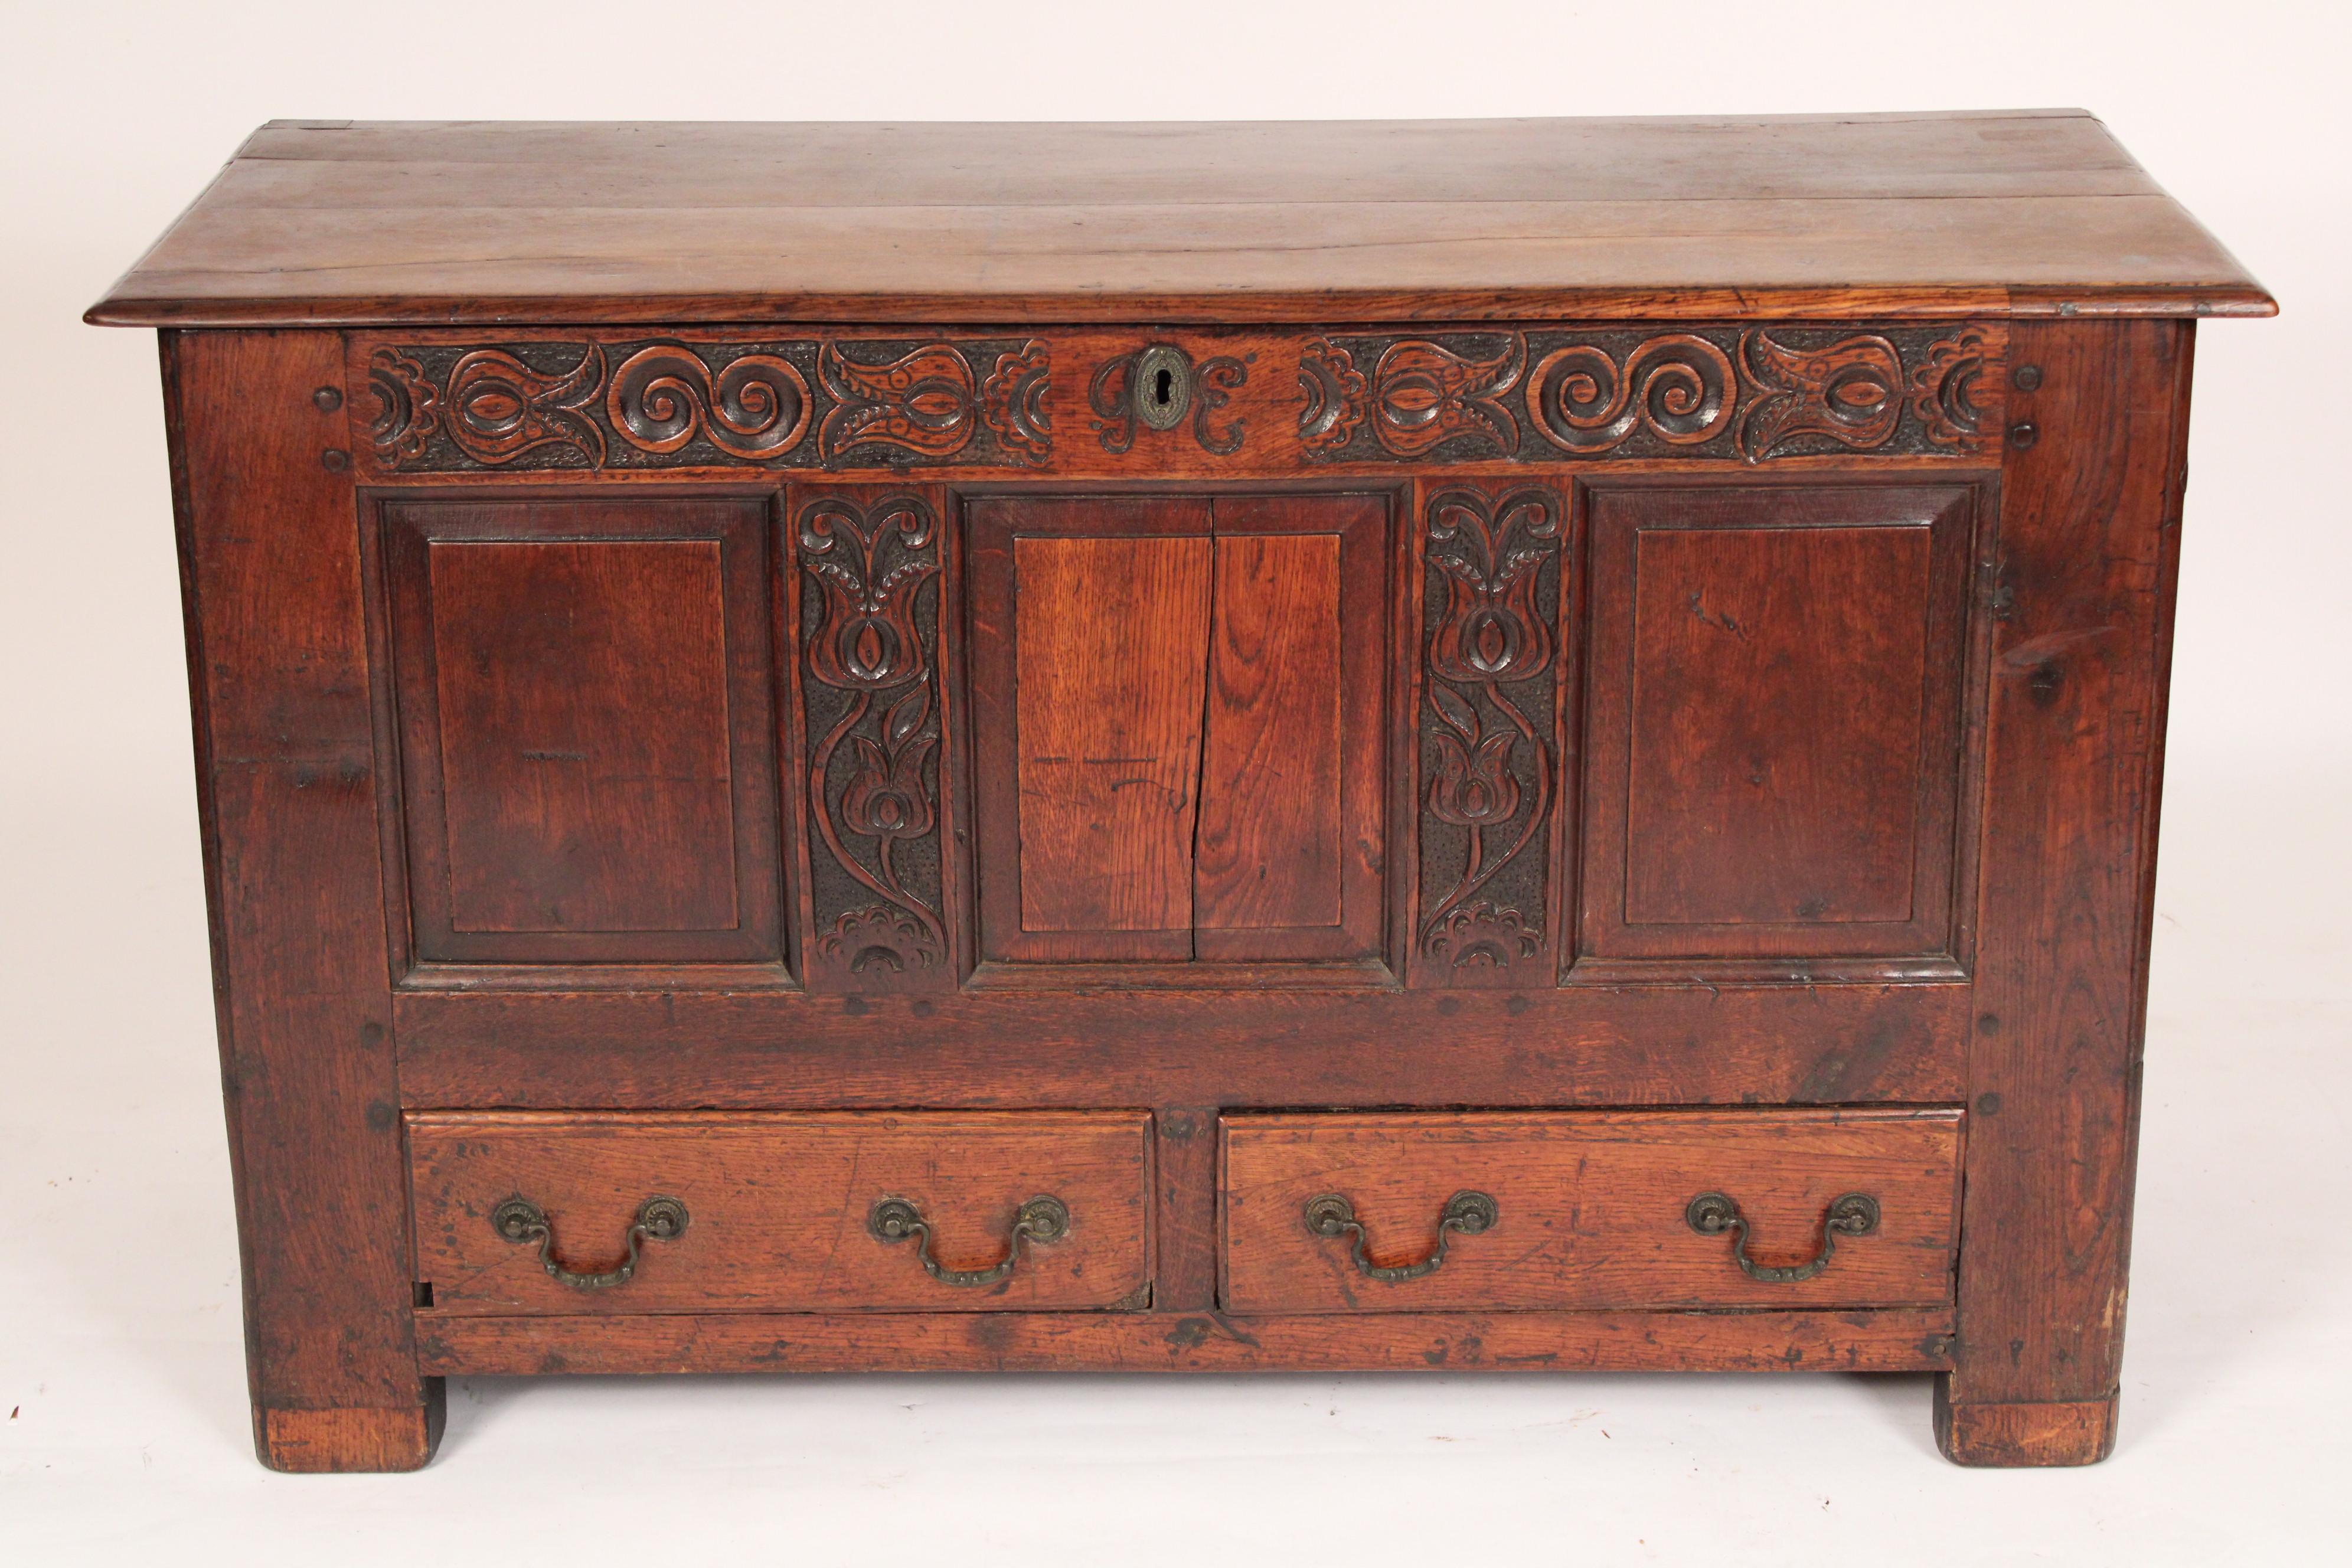 Antique English oak trunk, 18th century. With a rectangular overhanging top, the front with a carved horizontal member with the initials GE over 4 stiles the inner stiles with carvings and two drawers resting on block feet.